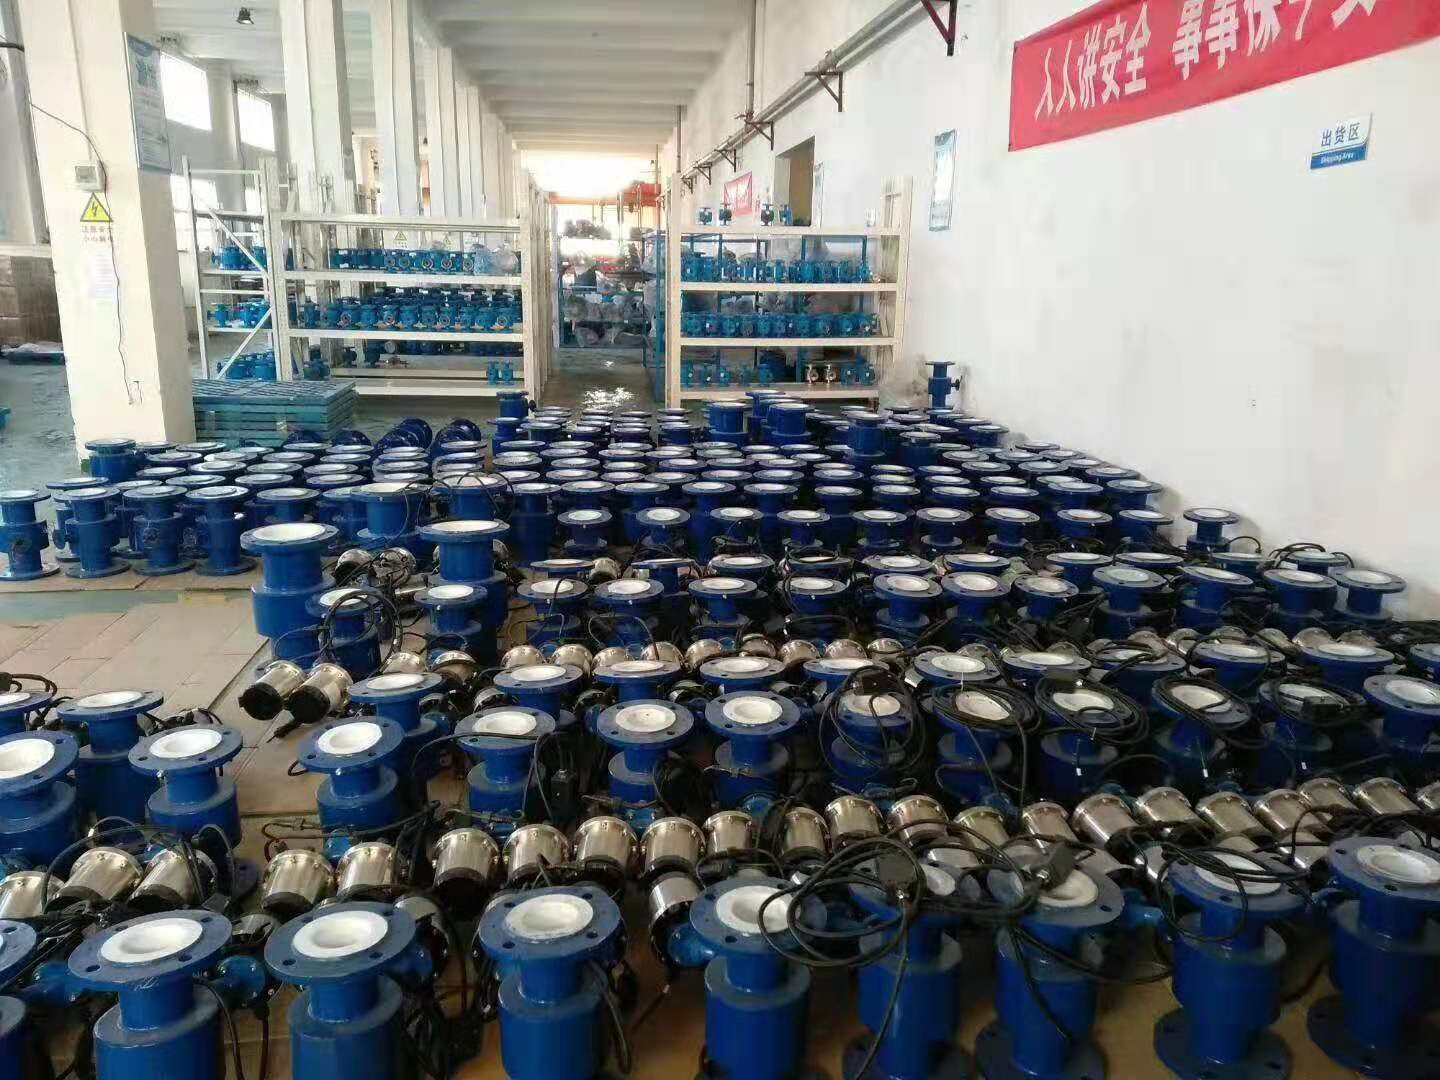 437pcs W-M3000 Battery Powered Electromagnetic Flow Meter Will Be Ready For Shipment